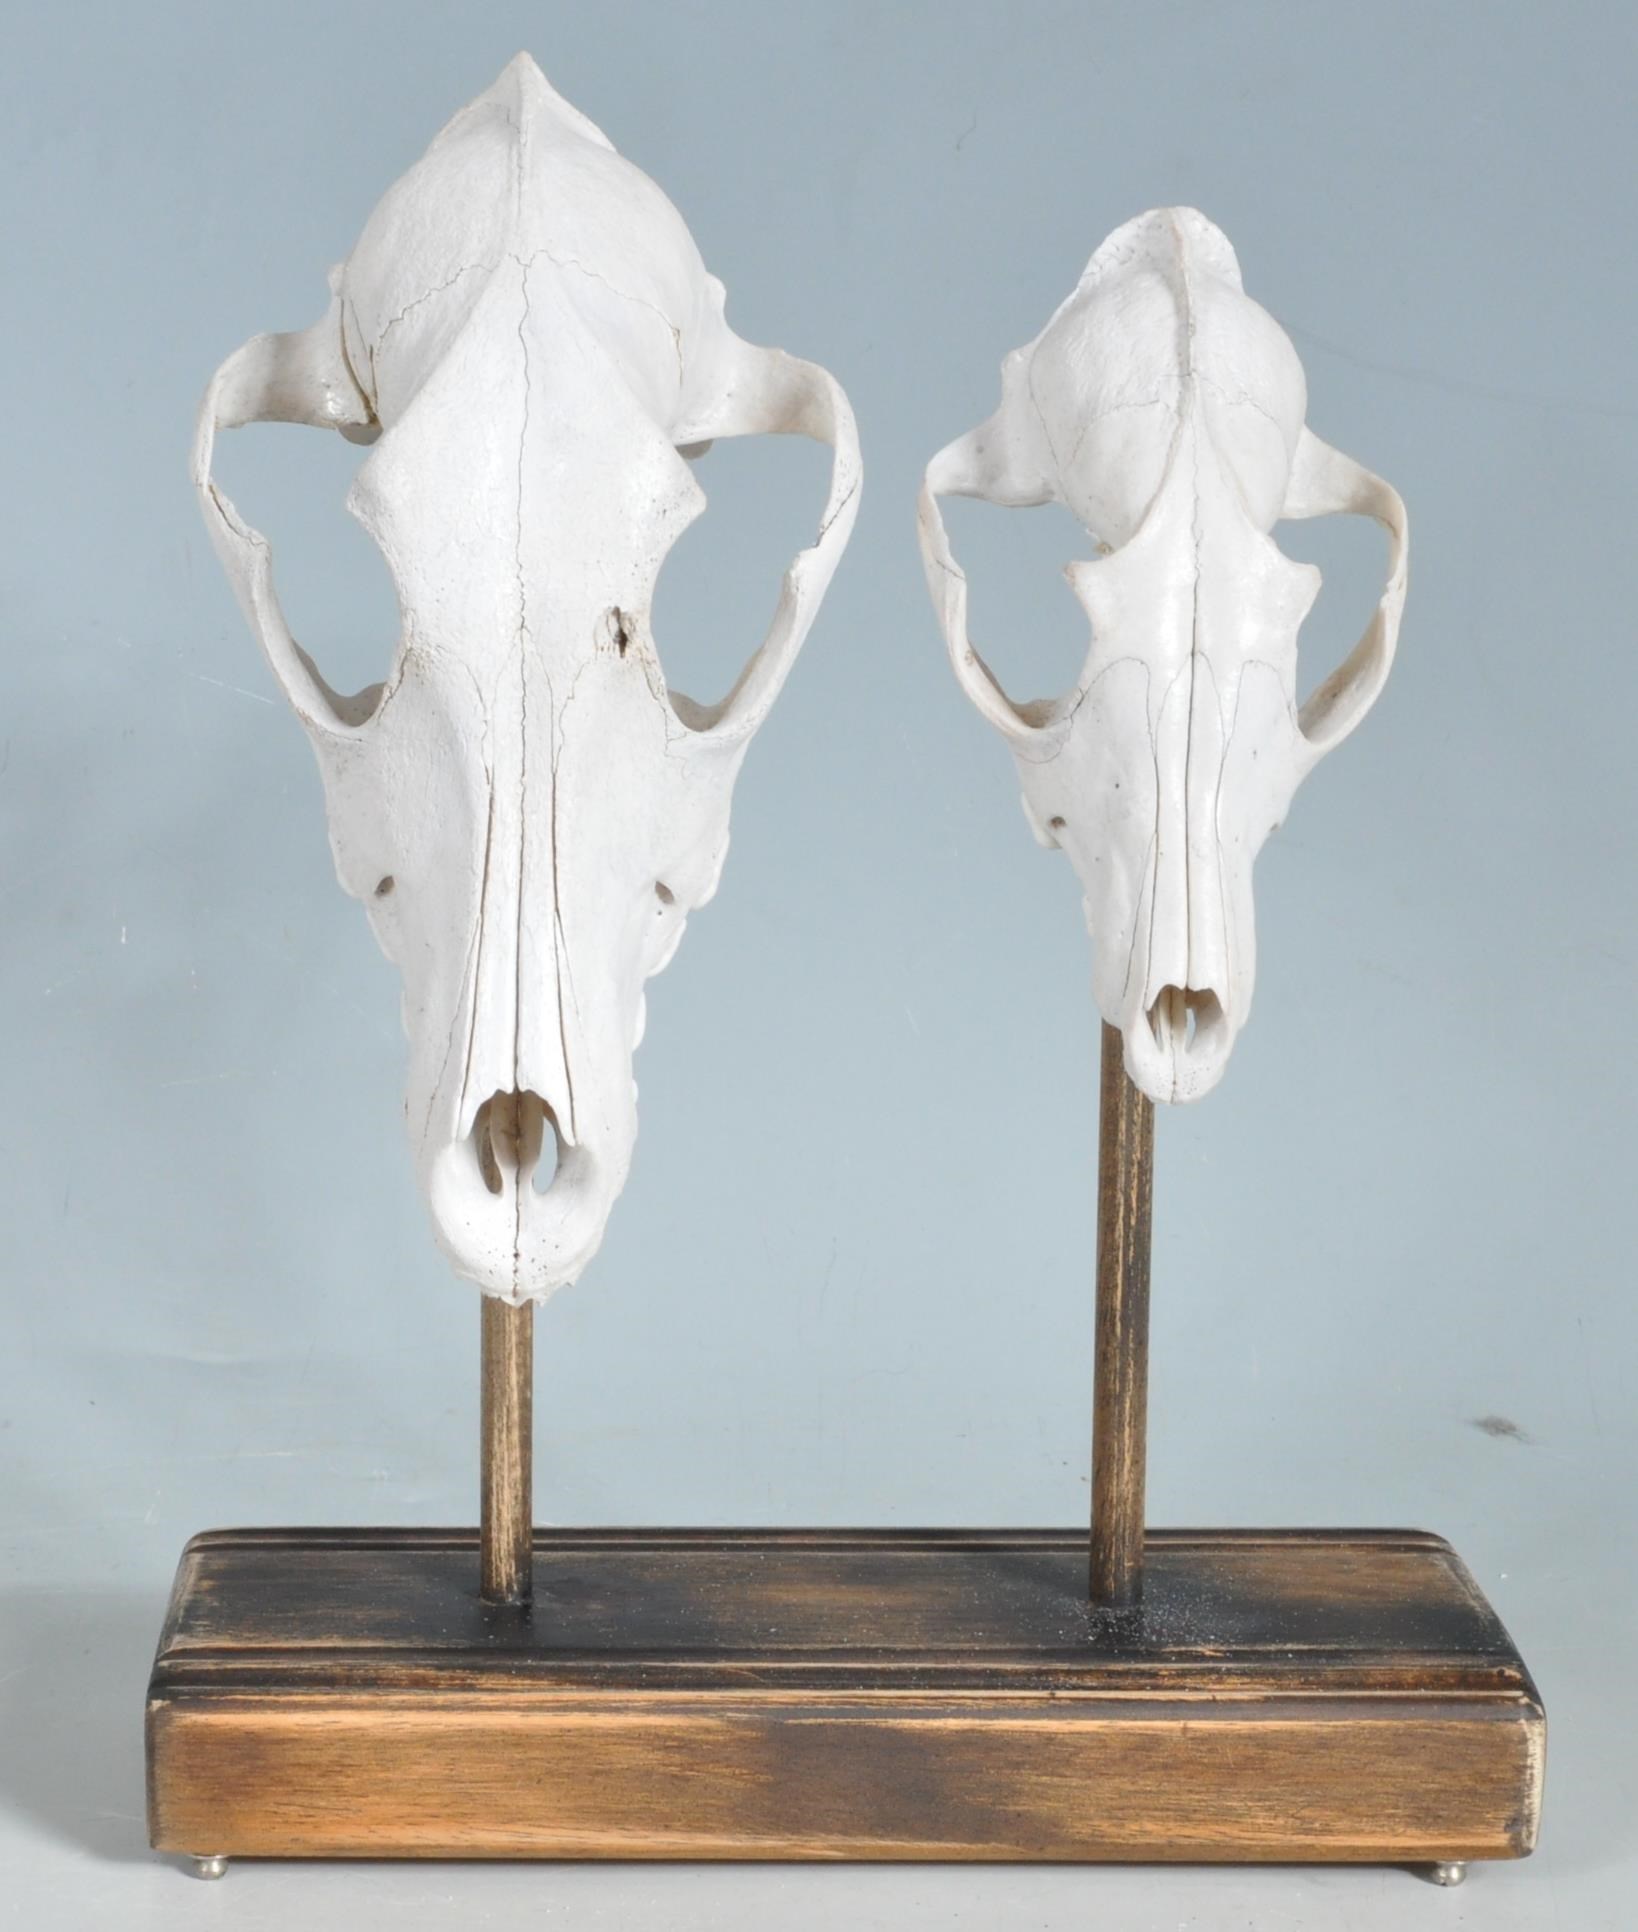 TWO MOUNTED FOXES SKULLS